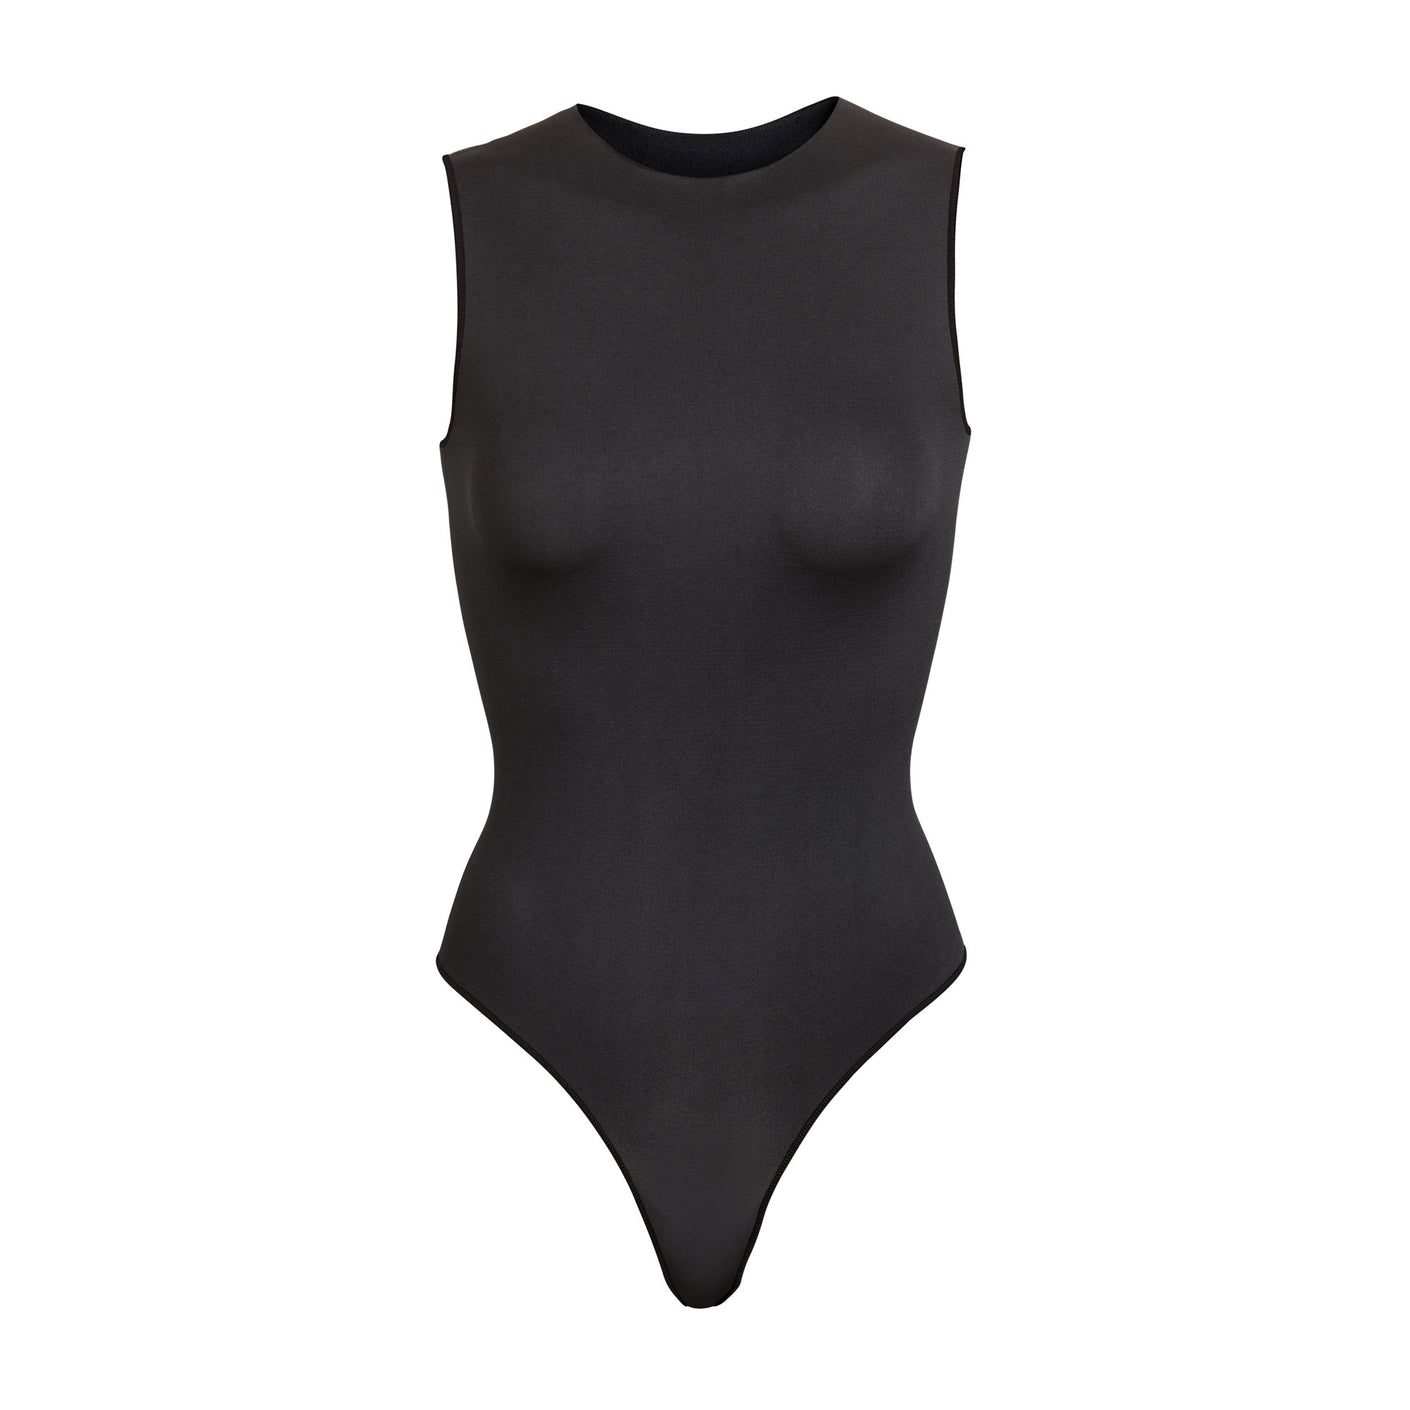 SKIMS on X: SKIMS Essential Bodysuits provide the perfect base